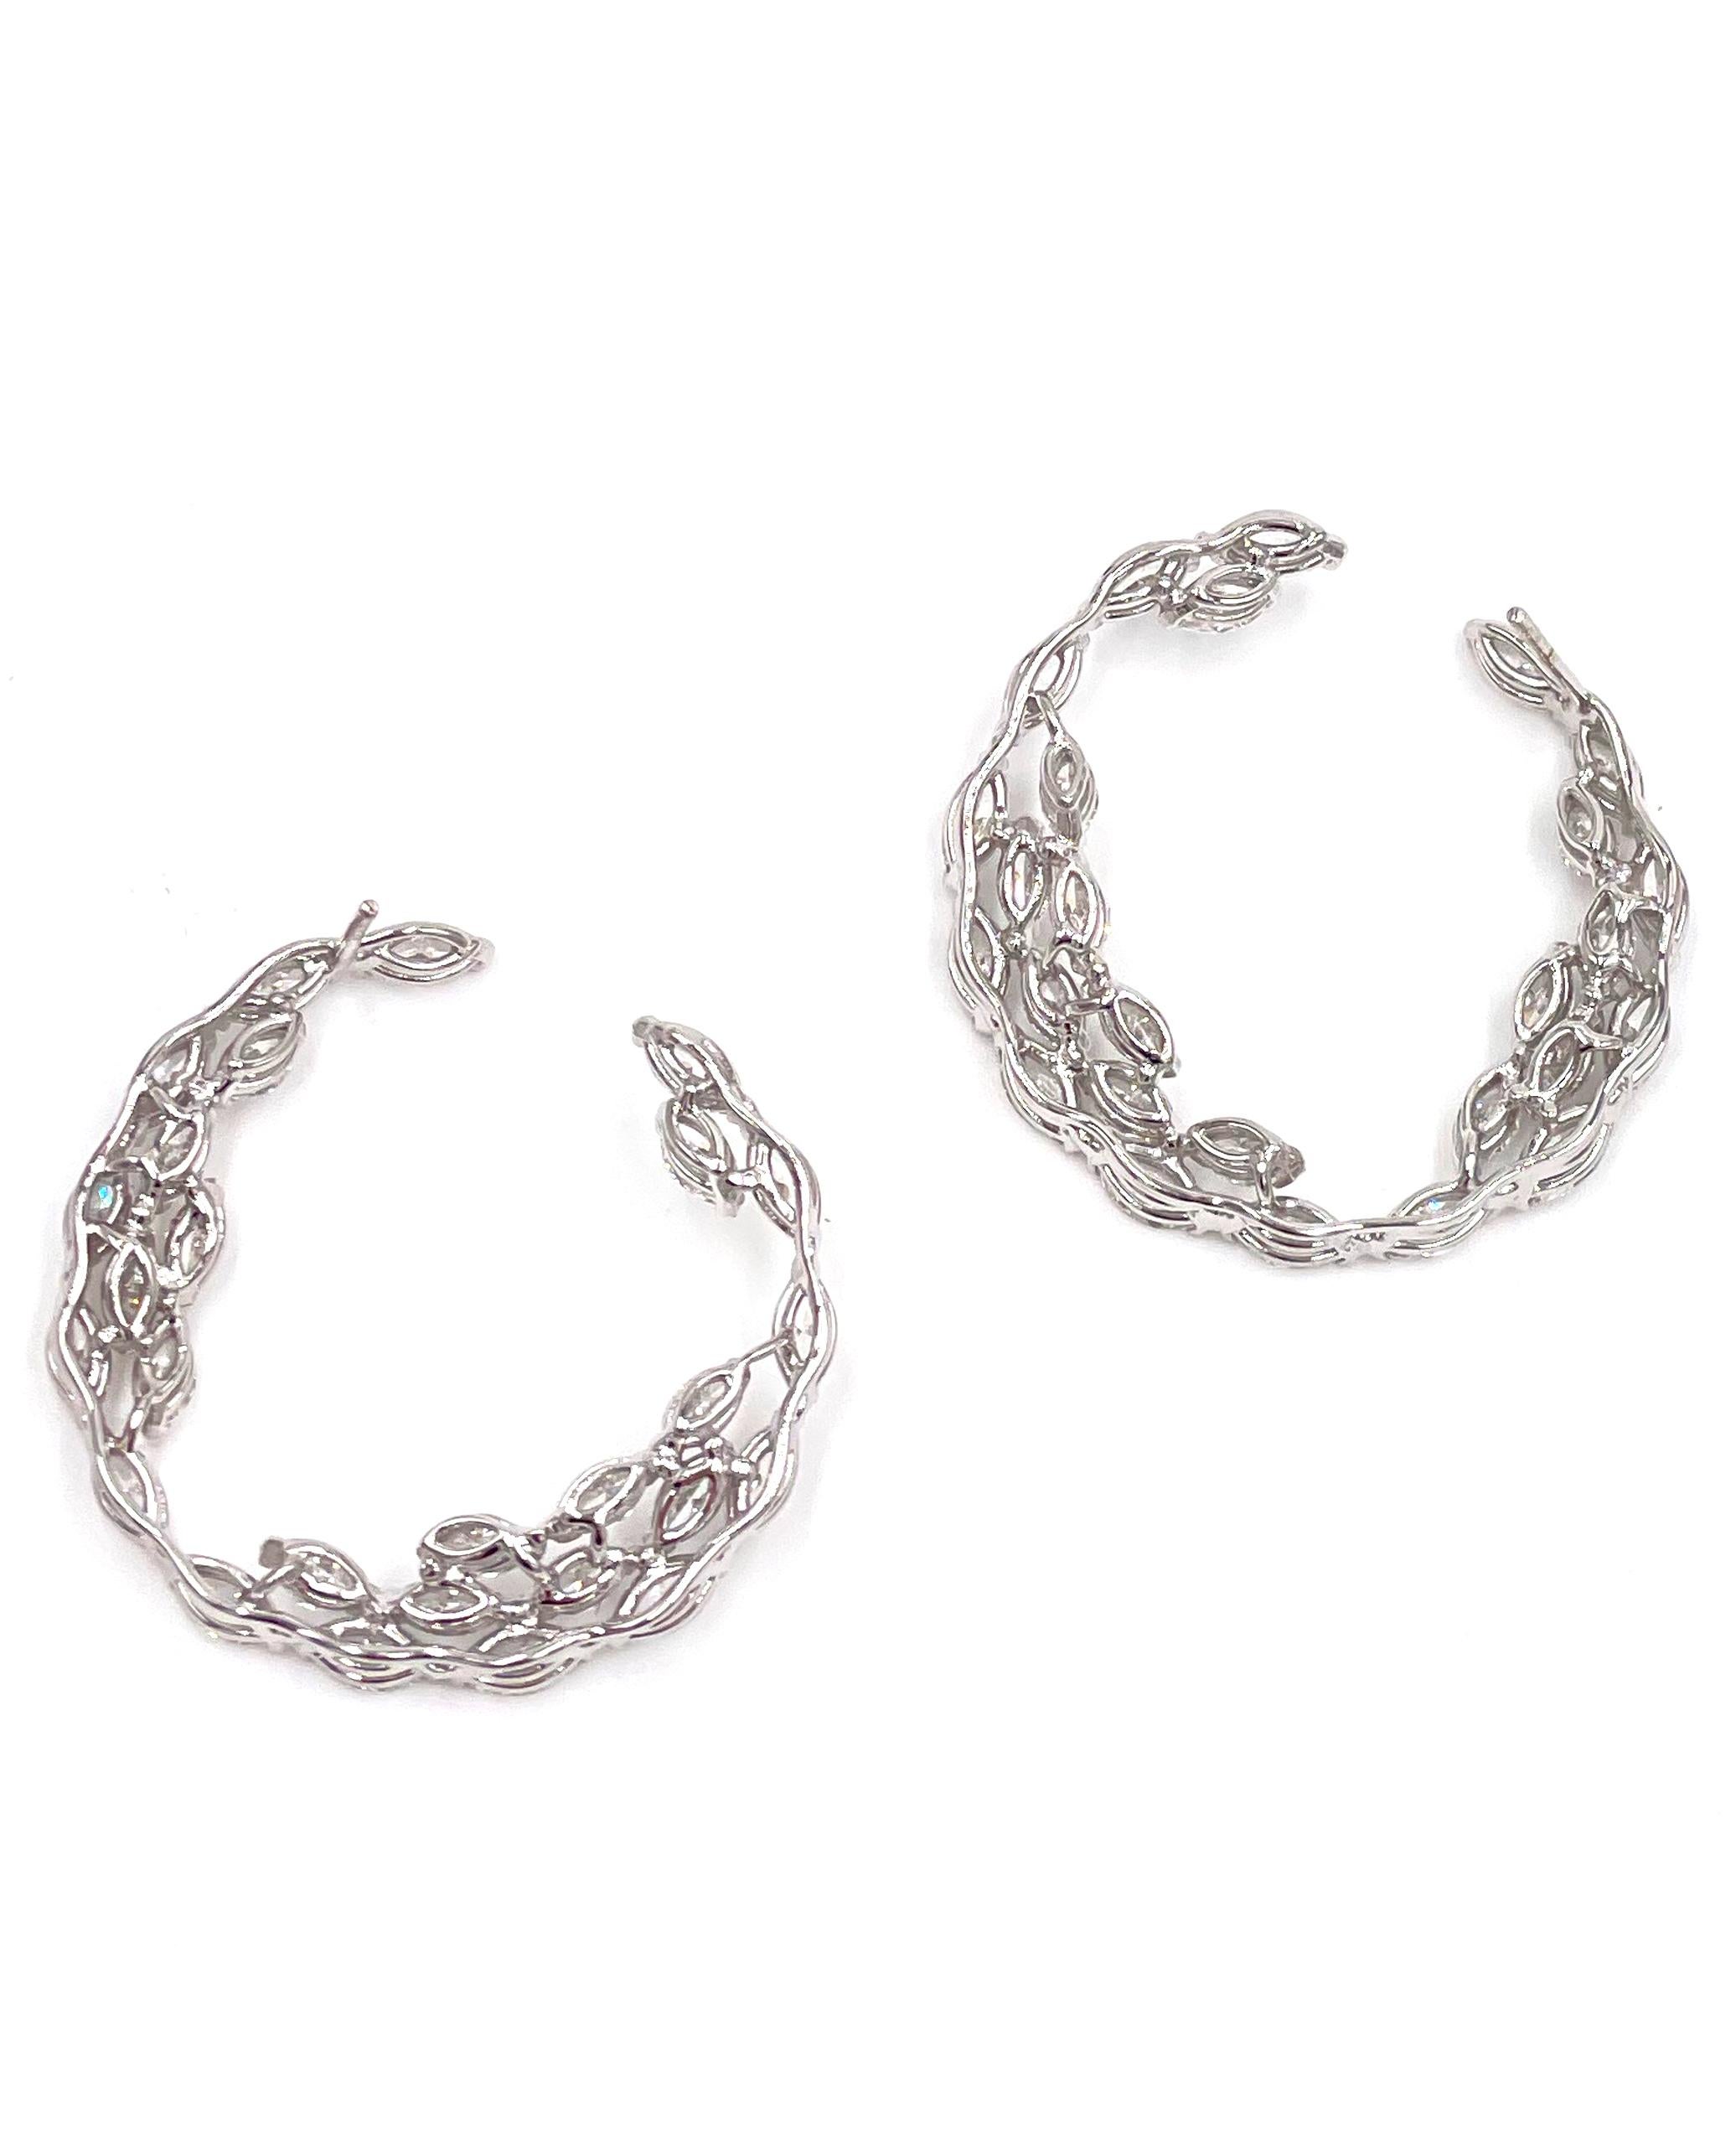 Contemporary 18K White Gold Diamond Hoop Earrings, 7.68 Carats